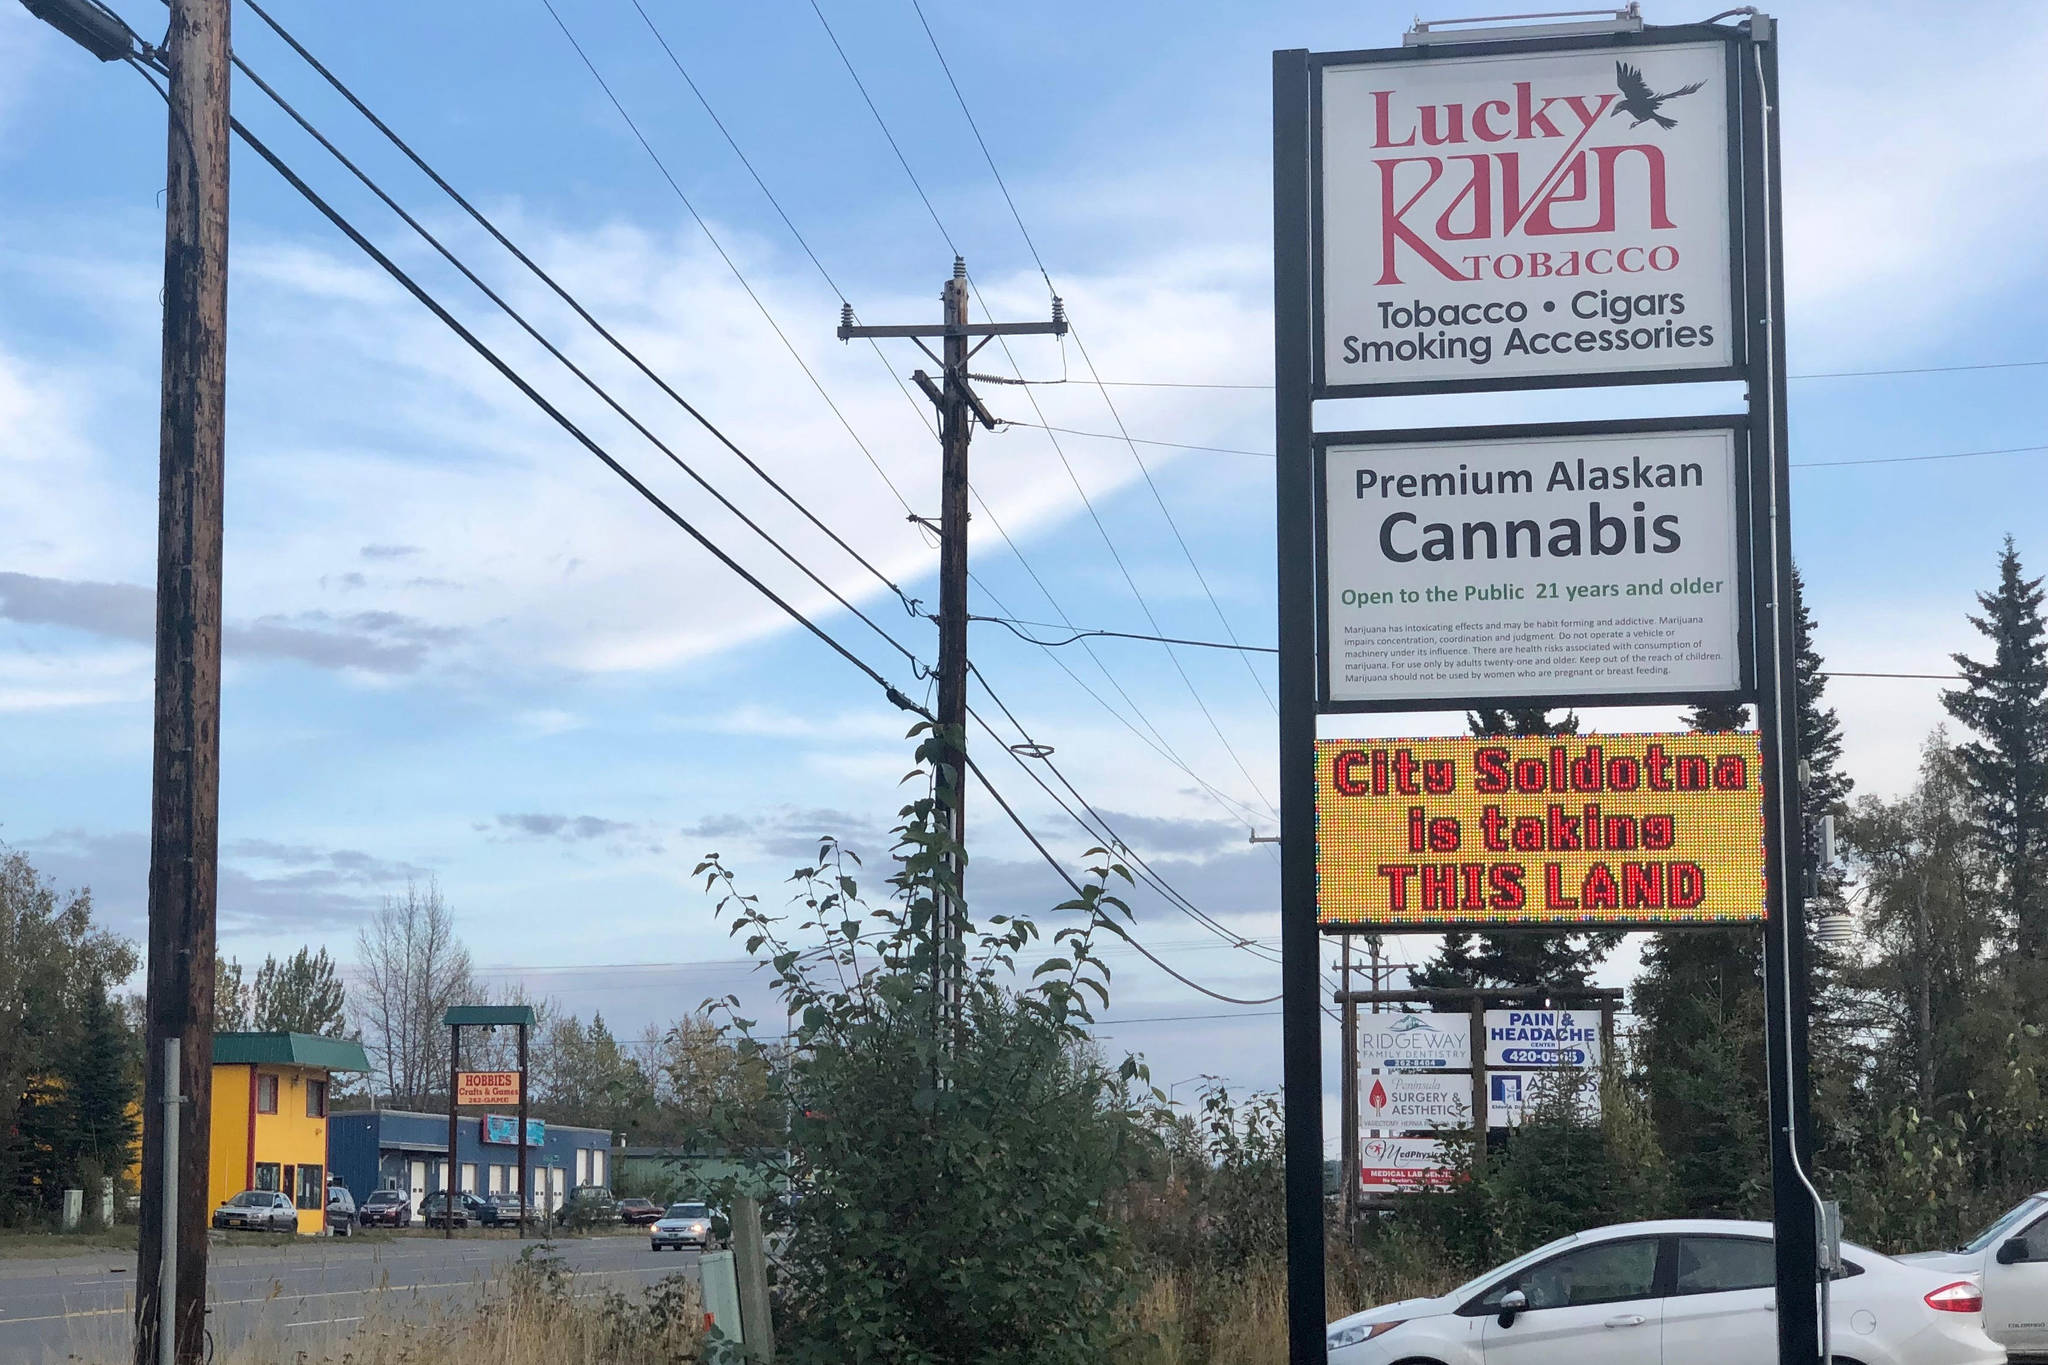 A message opposing annexation is visible on an electronic sign at Lucky Raven Tobacco, located inside one of the proposed areas for annexation, on Thursday, Sept. 5, 2019, near Soldotna, Alaska. (Photo by Victoria Petersen/Peninsula Clarion)